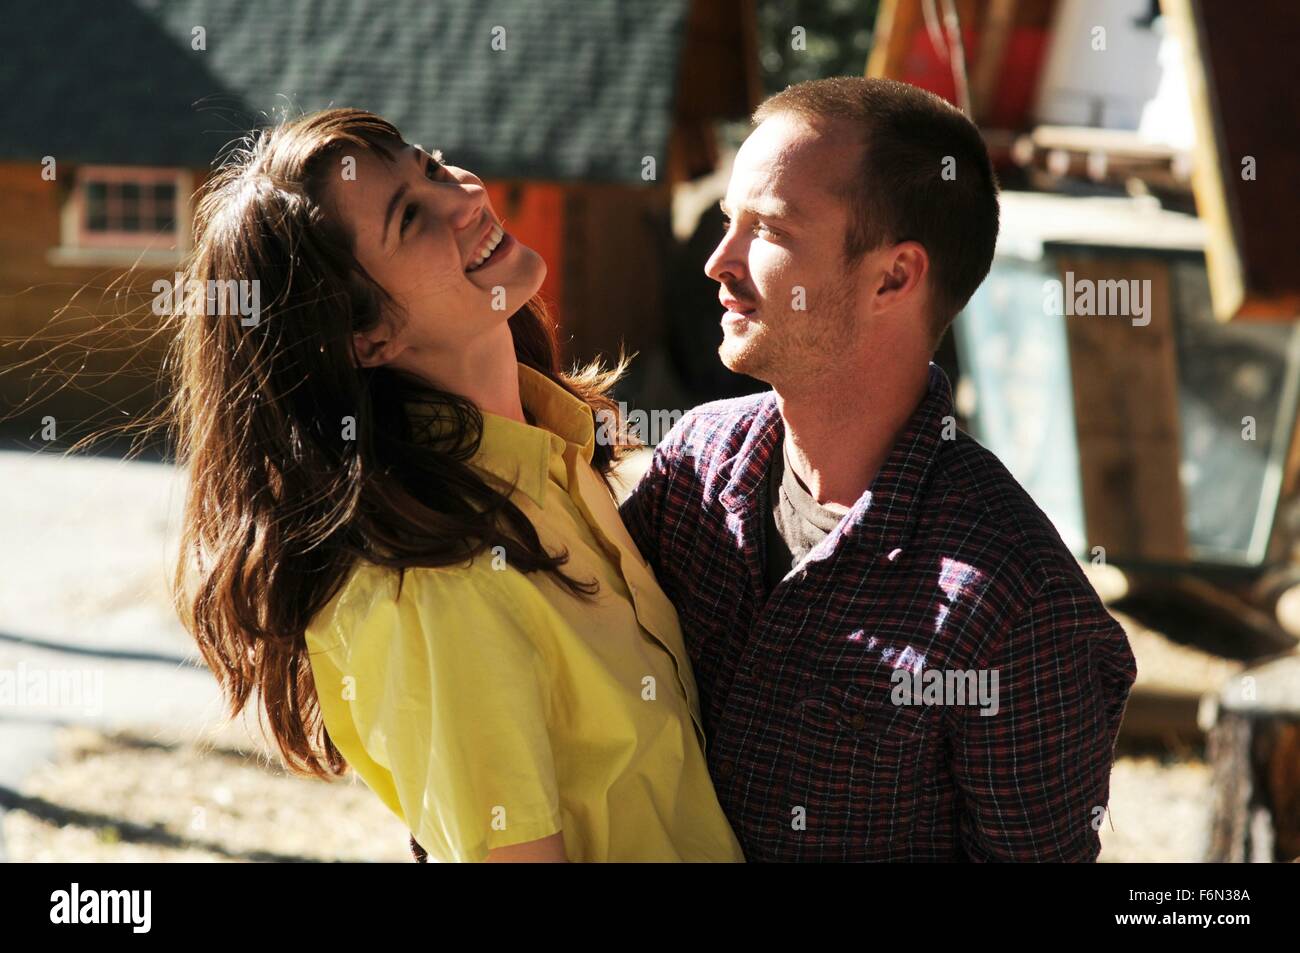 RELEASE DATE: January 22, 2012 MOVIE TITLE: Smashed aka Lioma STUDIO: Sony Pictures Classics DIRECTOR: James Ponsoldt PLOT: A married couple whose bond is built on a mutual love of alcohol gets their relationship put to the test when the wife decides to get sober. PICTURED: MARY ELIZABETH WINSTEAD as Kate Hannah and AARON PAUL as Charlie Hannah (Credit Image: c Sony Pictures Classics/Entertainment Pictures) Stock Photo